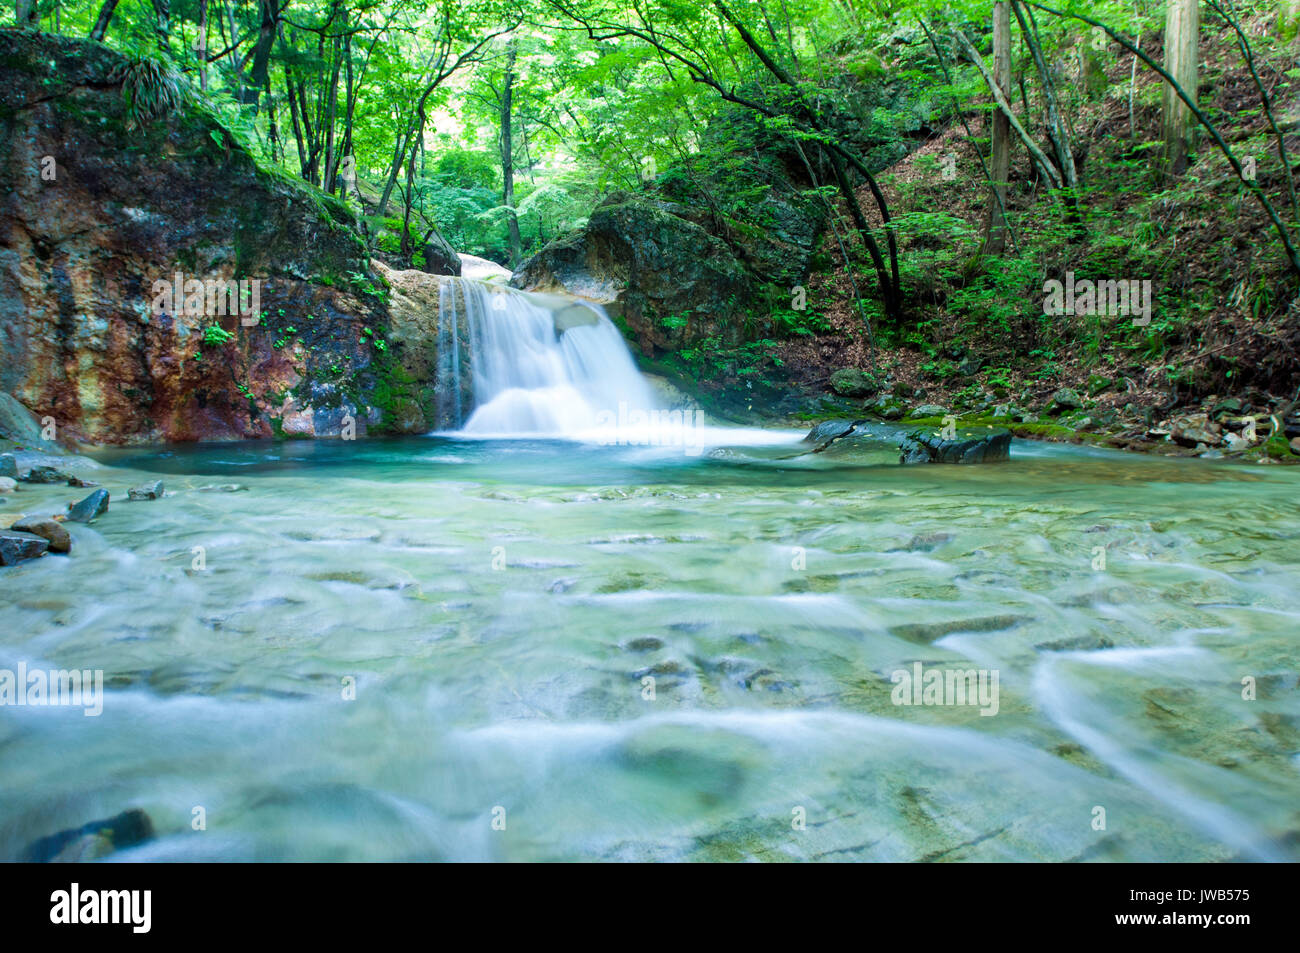 A natural waterfall in the Nakanojo district in Gunma, Japan Stock Photo